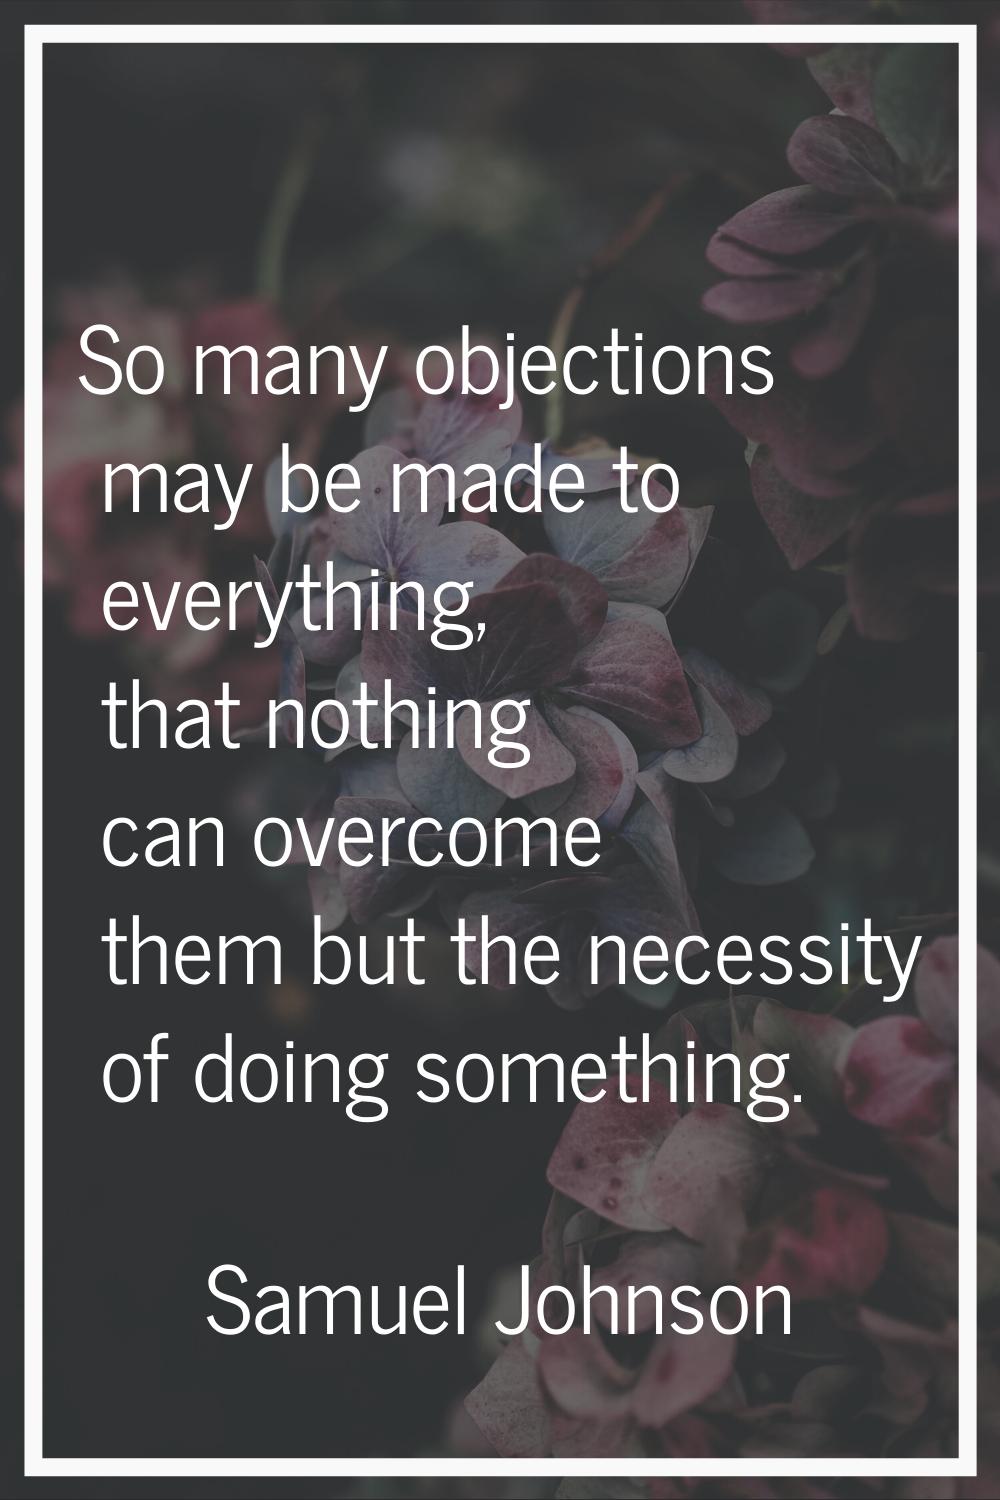 So many objections may be made to everything, that nothing can overcome them but the necessity of d